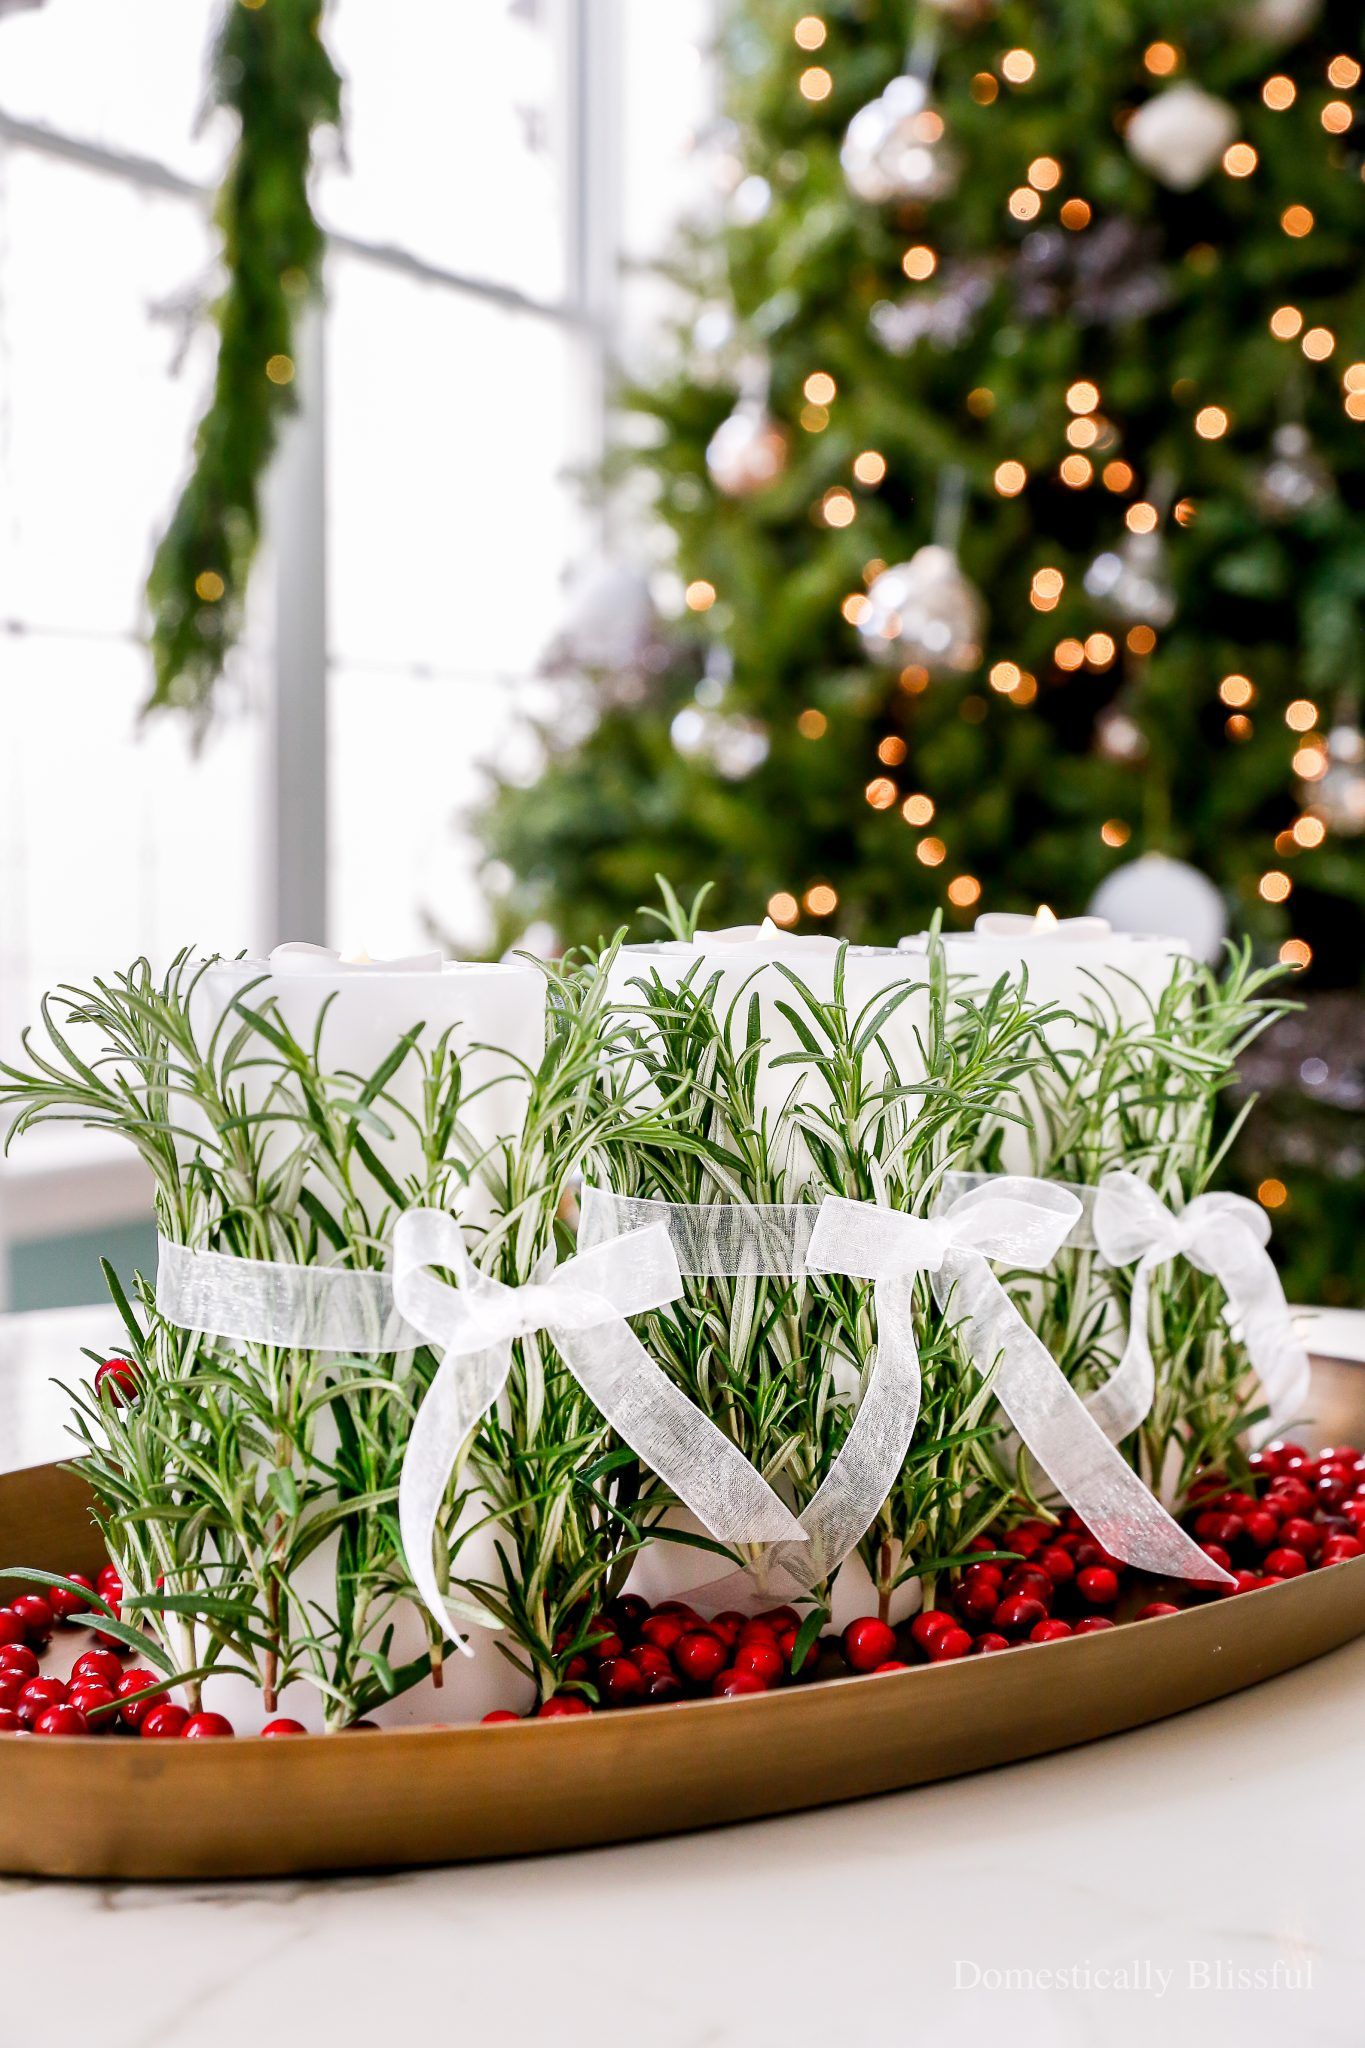 60 Simple Christmas Table Decorations and Holiday Centerpieces